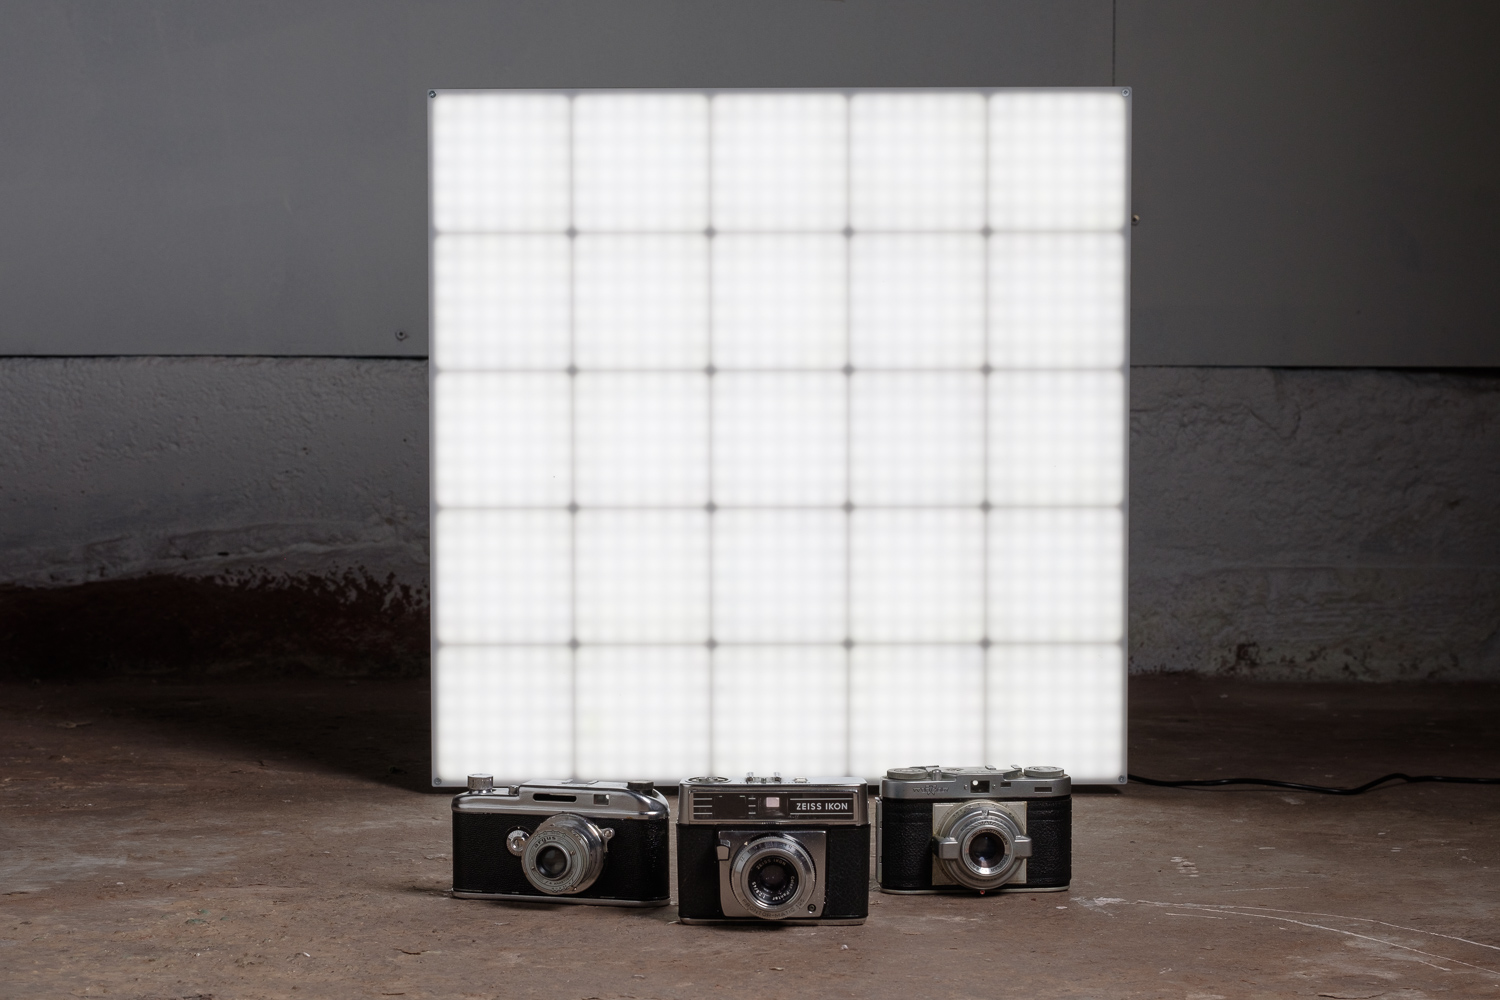 Photon Light Module System hands-on: Great for product pics